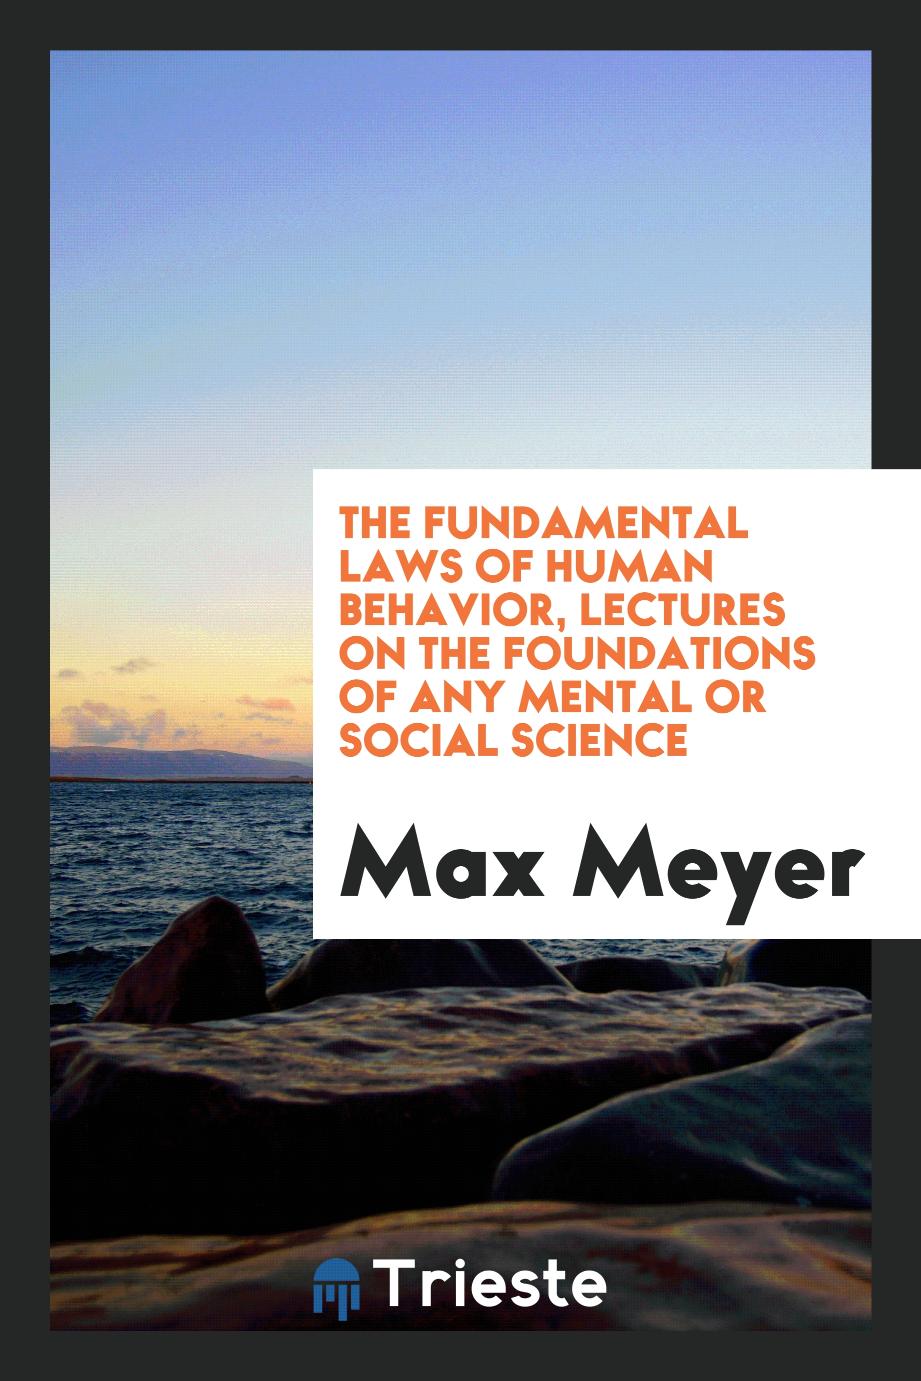 The fundamental laws of human behavior, lectures on the foundations of any mental or social science